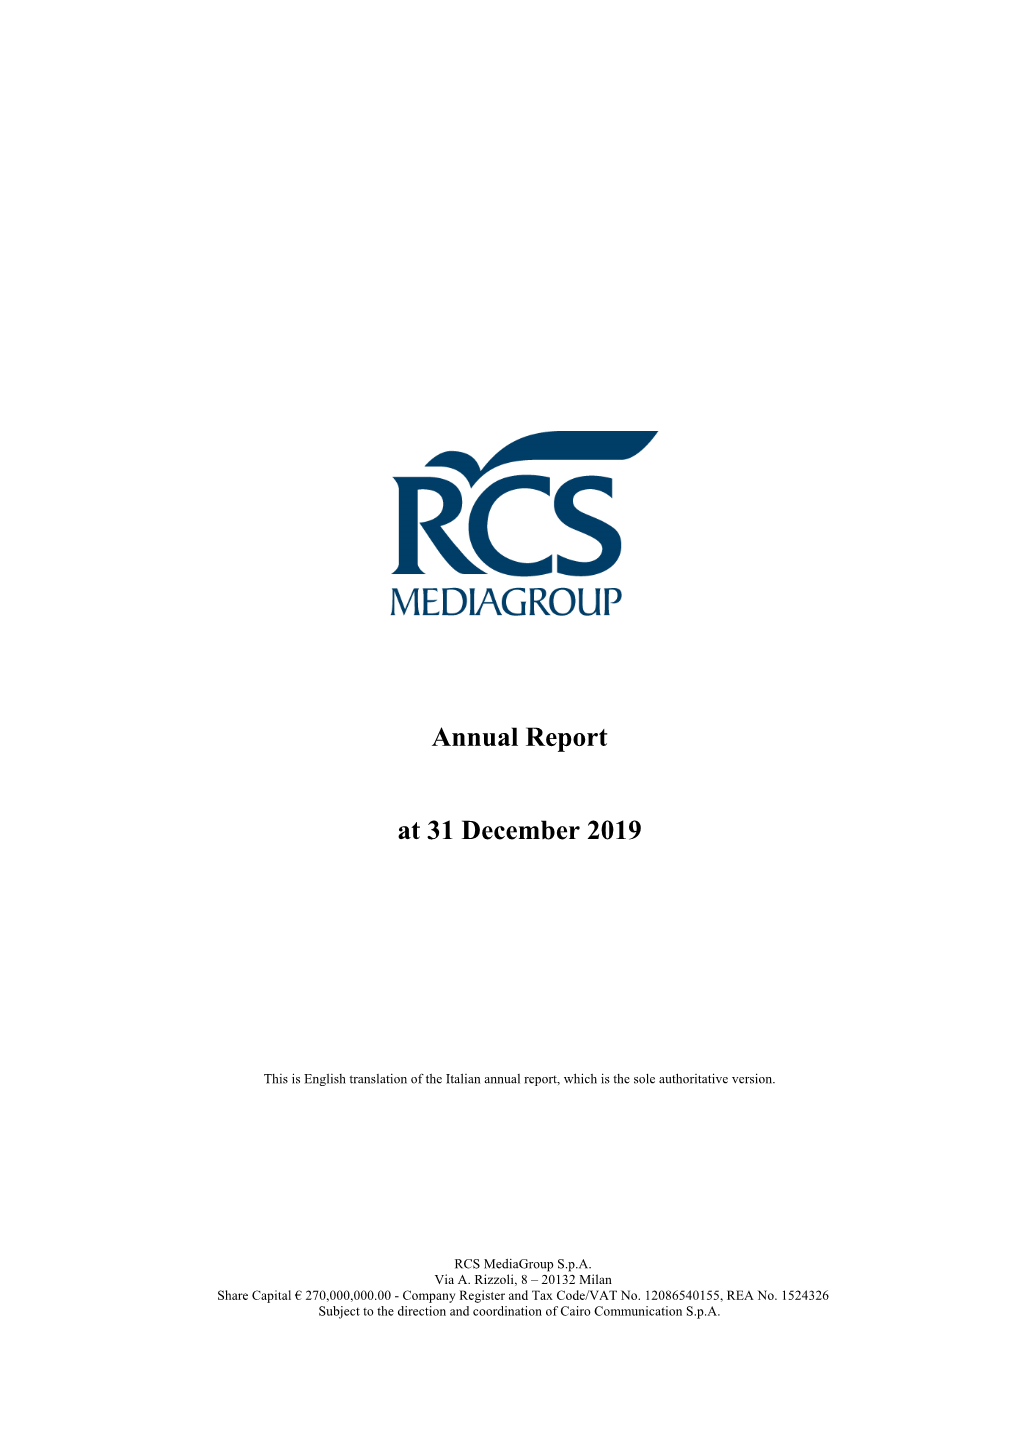 Annual Report at 31 December 2019 Incorporates the New IFRS 16 - Leases, Which Came Into Force As from 1 January 2019